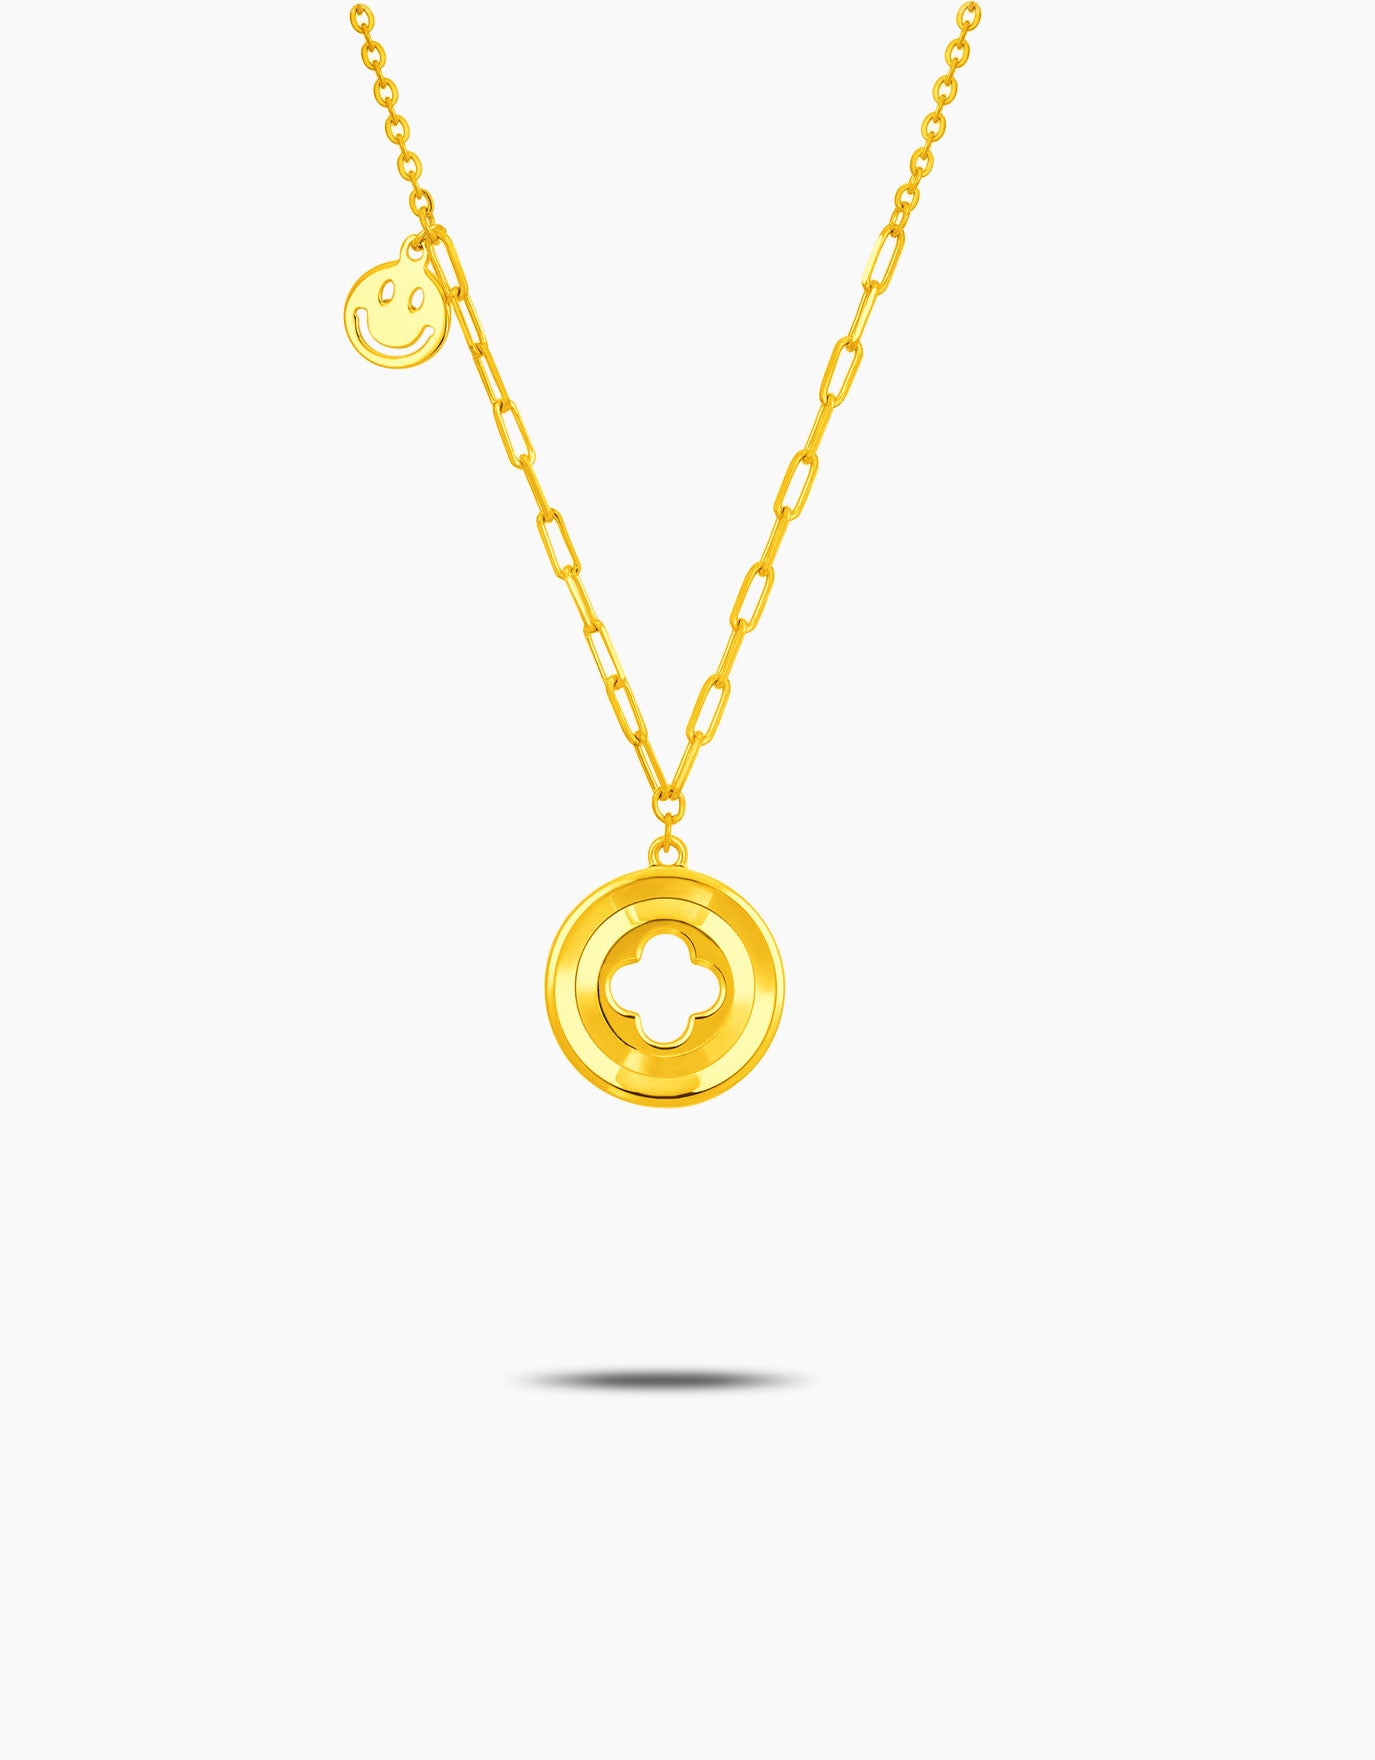 LVC 9IN Gracia Clover 999 Gold Necklace